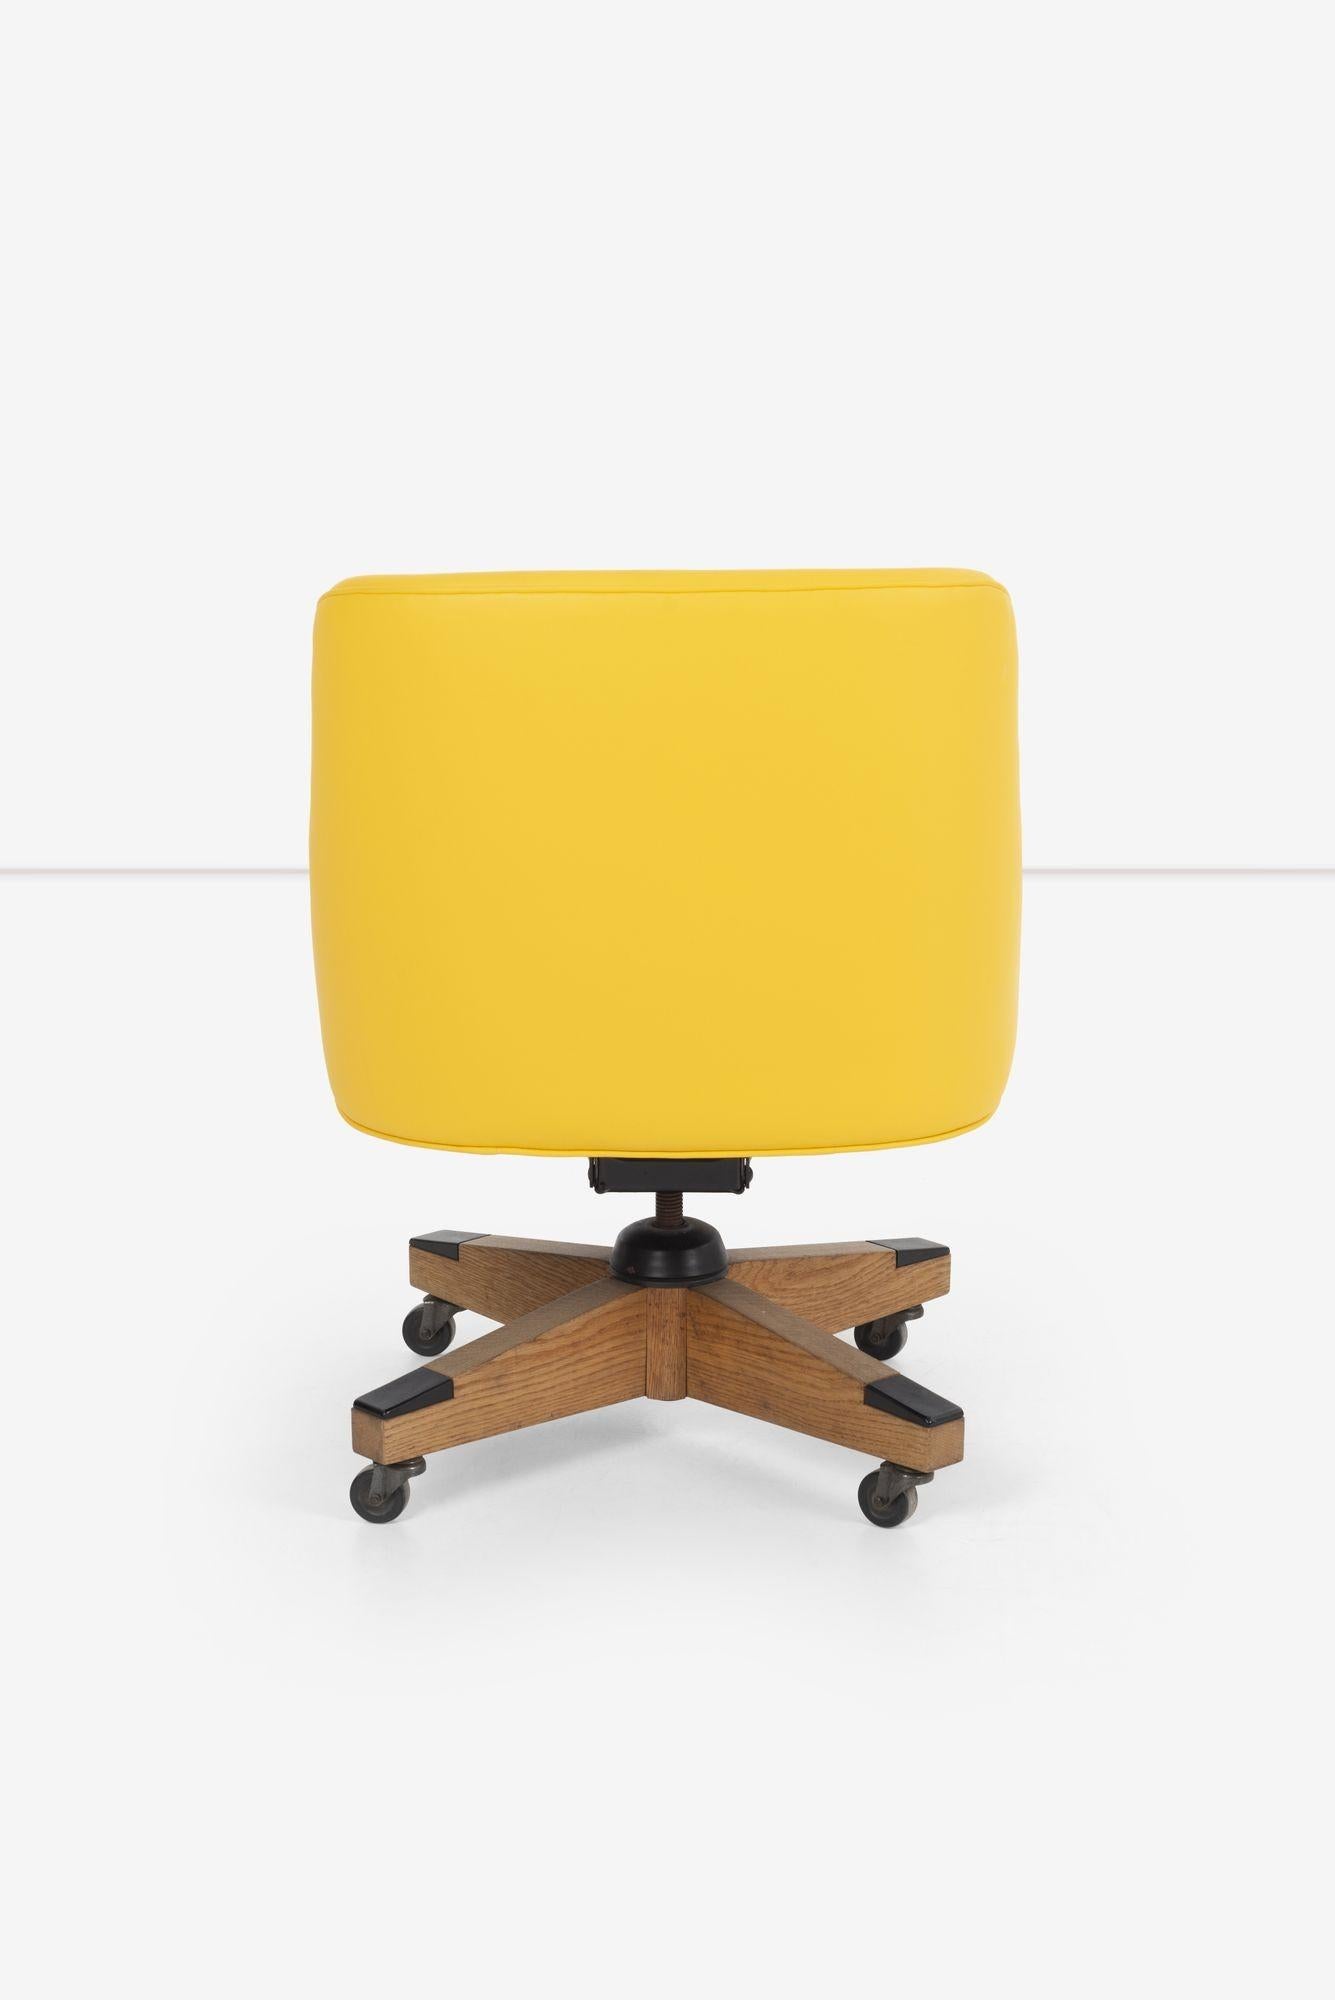 Mid-20th Century Jens Risom Desk Chair For Sale